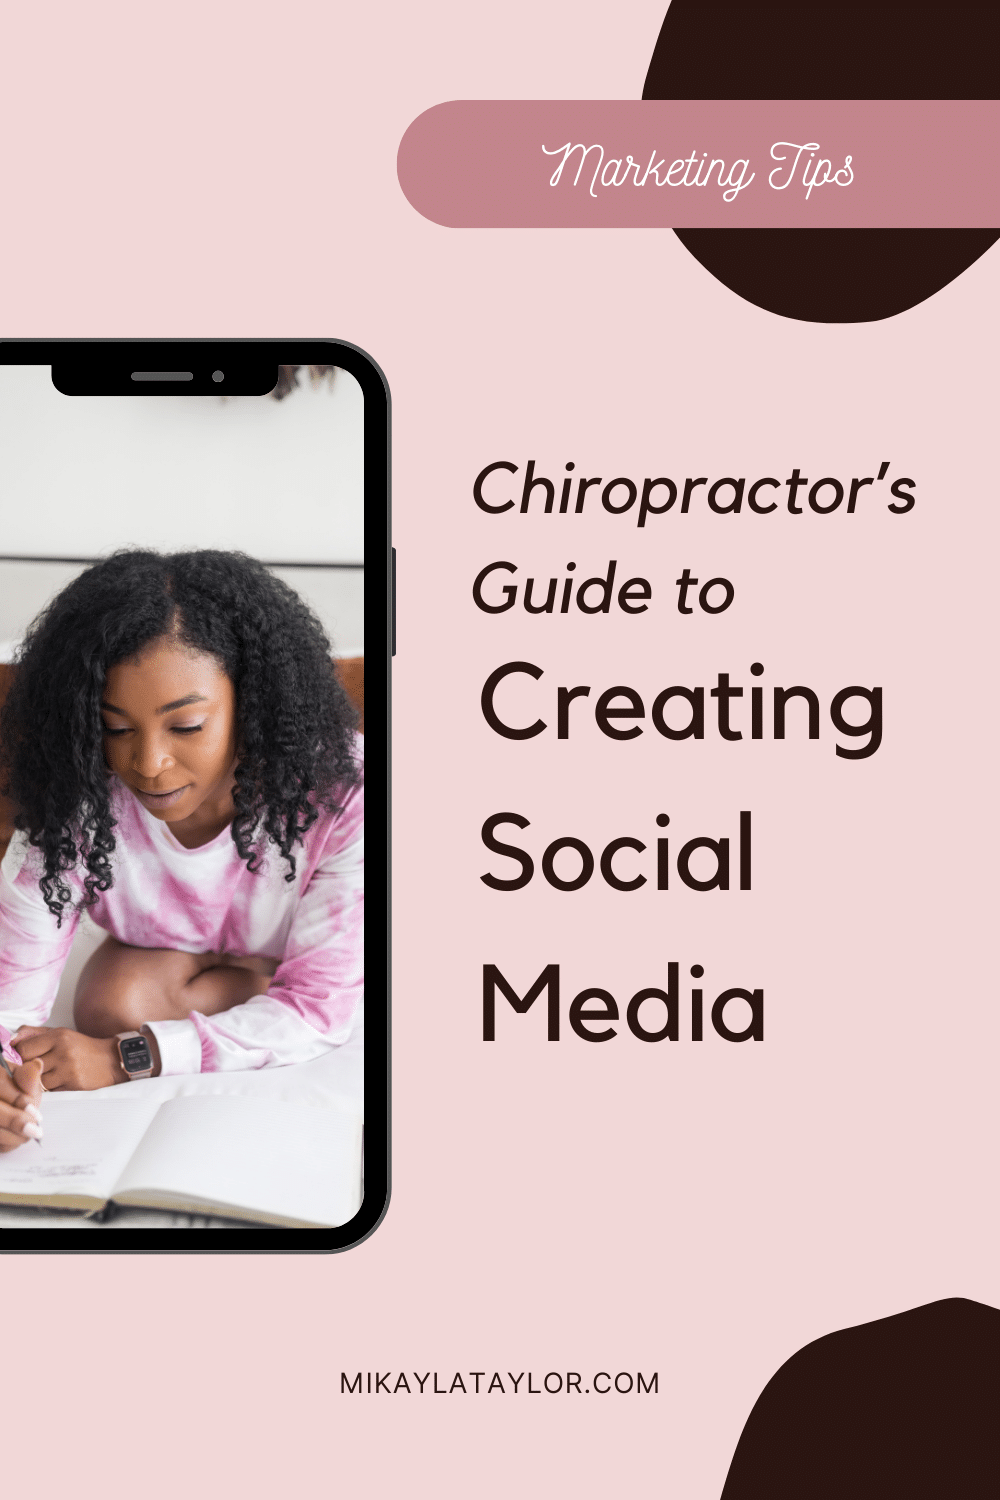 How To Create Social Media Content for Chiropractors Pinterest3